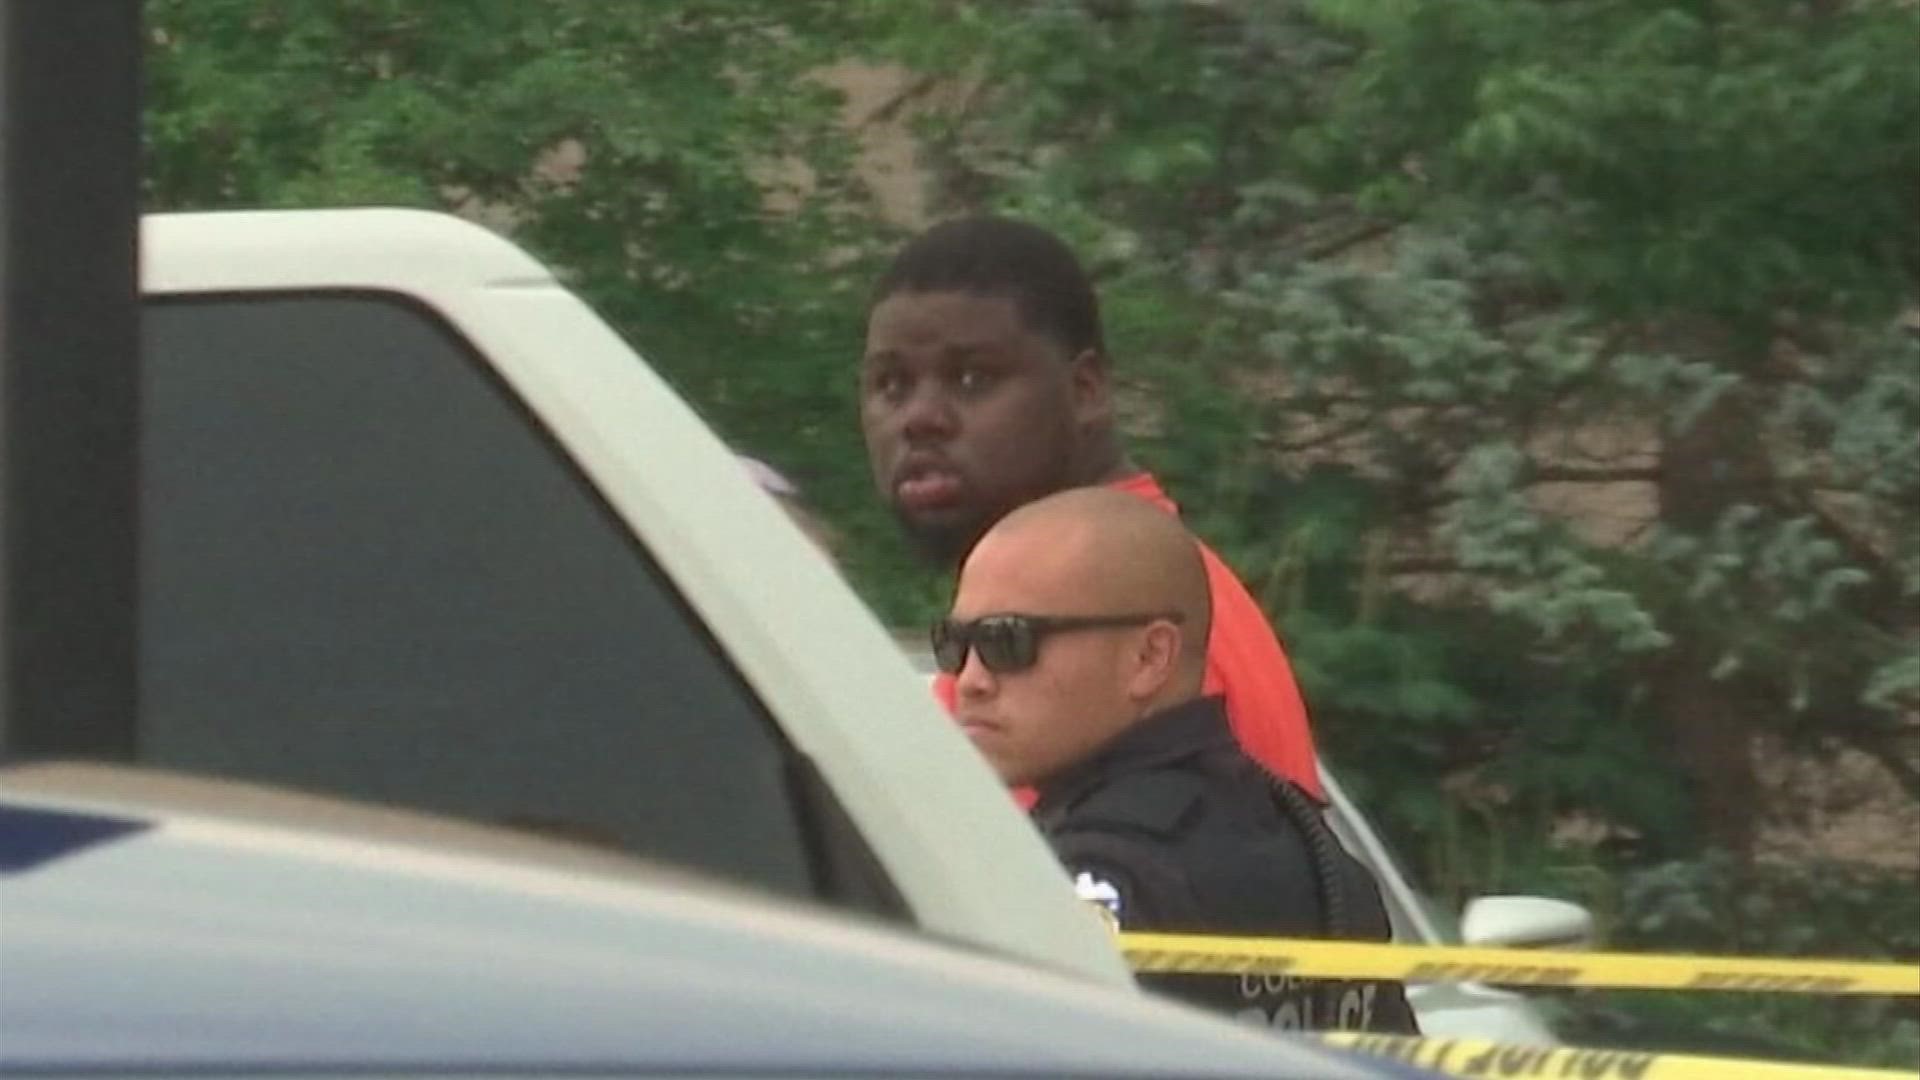 The suspect in the deadly shooting at the Mall at Tuttle Crossing is due to make his appearance in court this morning.